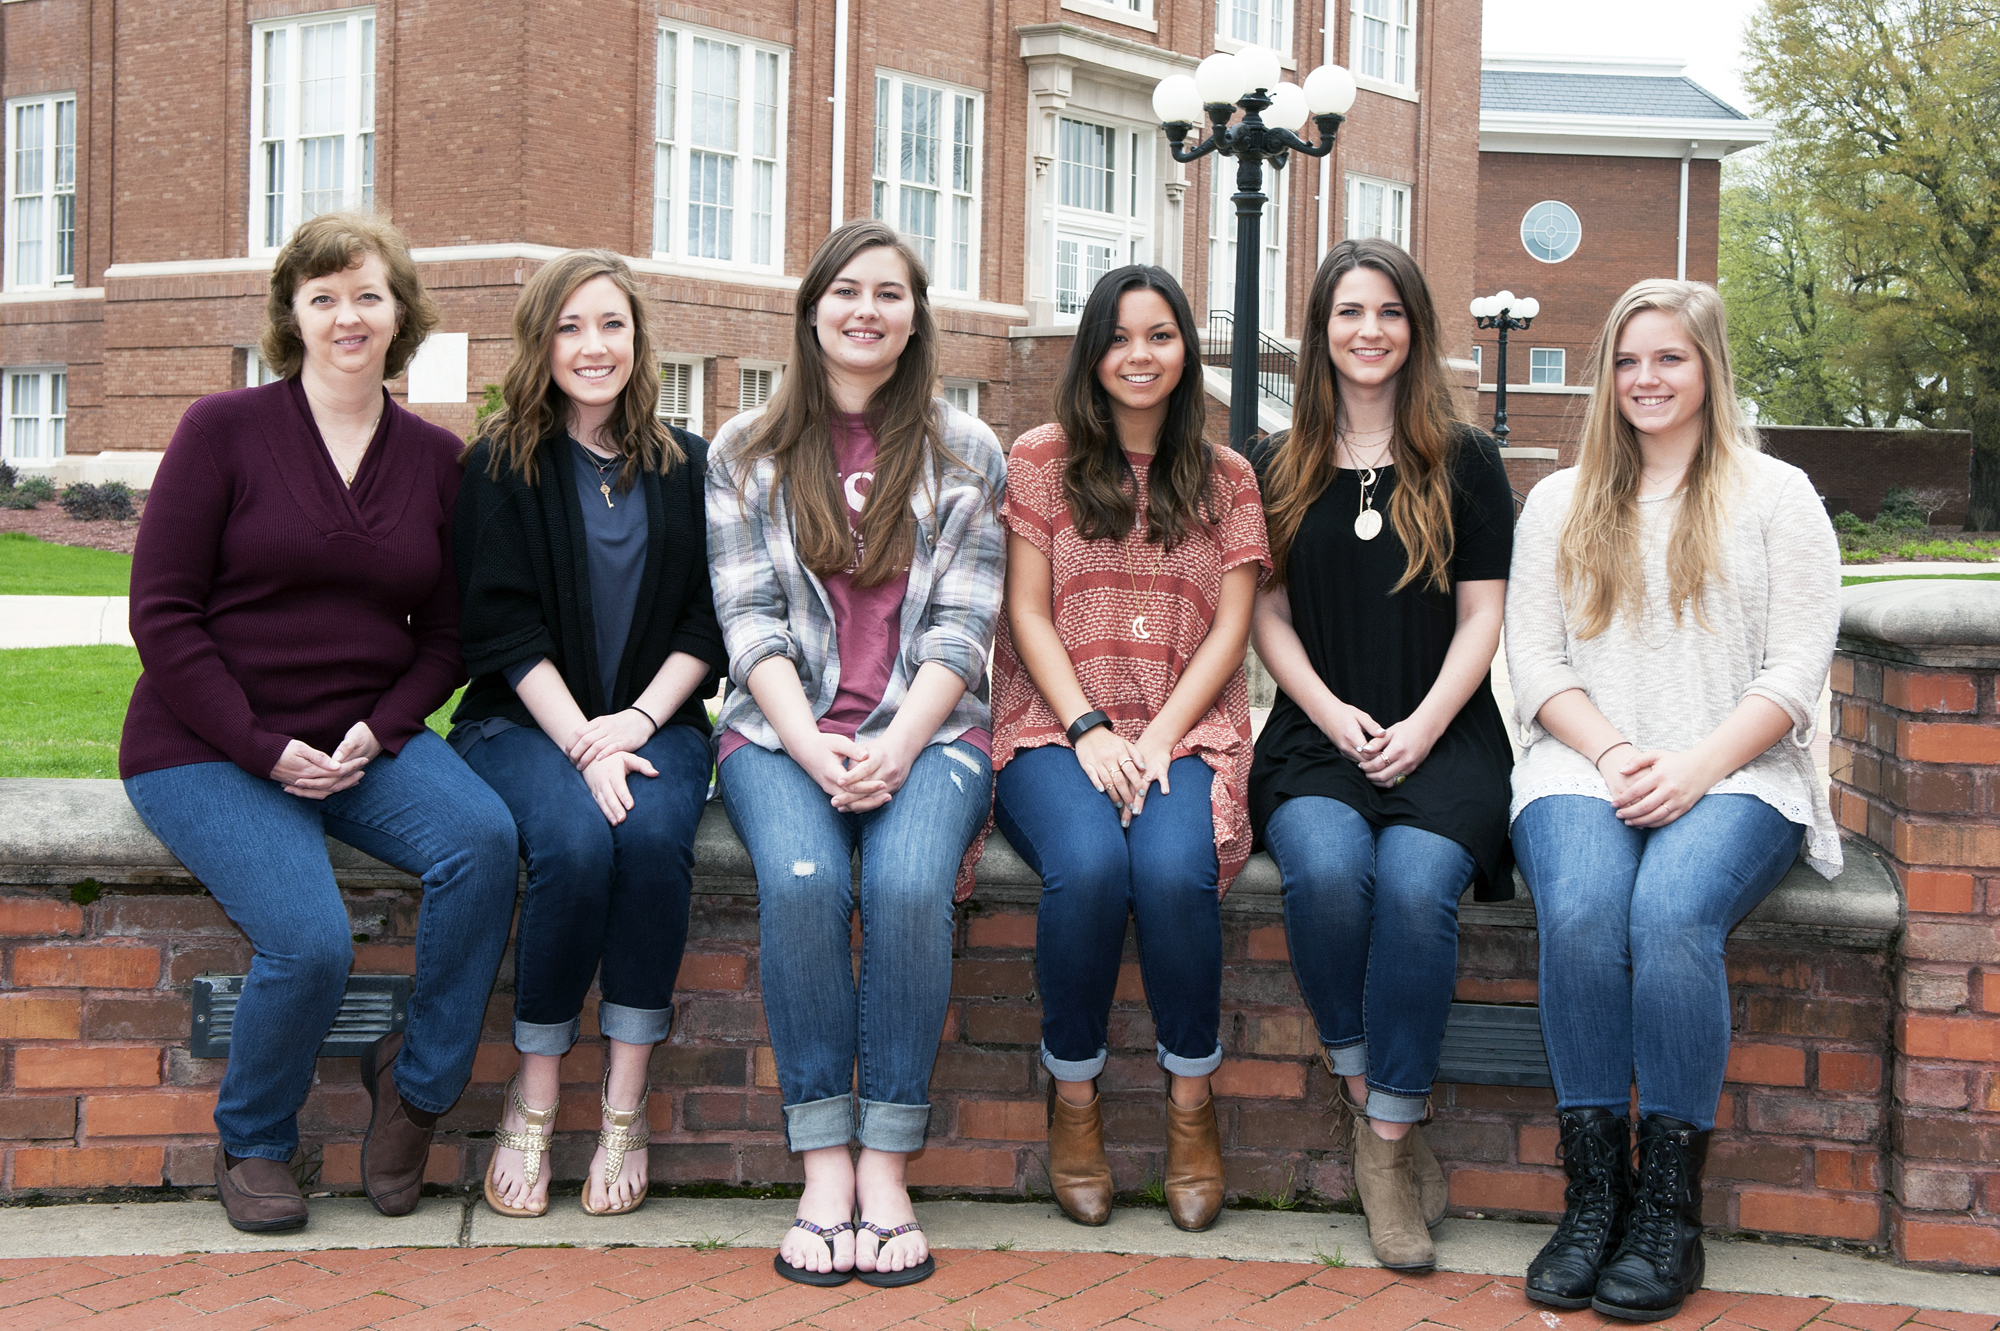 A group of interior design seniors studying at Mississippi State University won a design contest that will feature their ideas on the National Geographic channel's "Cabin Fever." From left are associate professor Amy Crumpton and students Anna Strom, Vanessa Holden, Victoria Owchar, Blake Marlar and Liz Grantham.